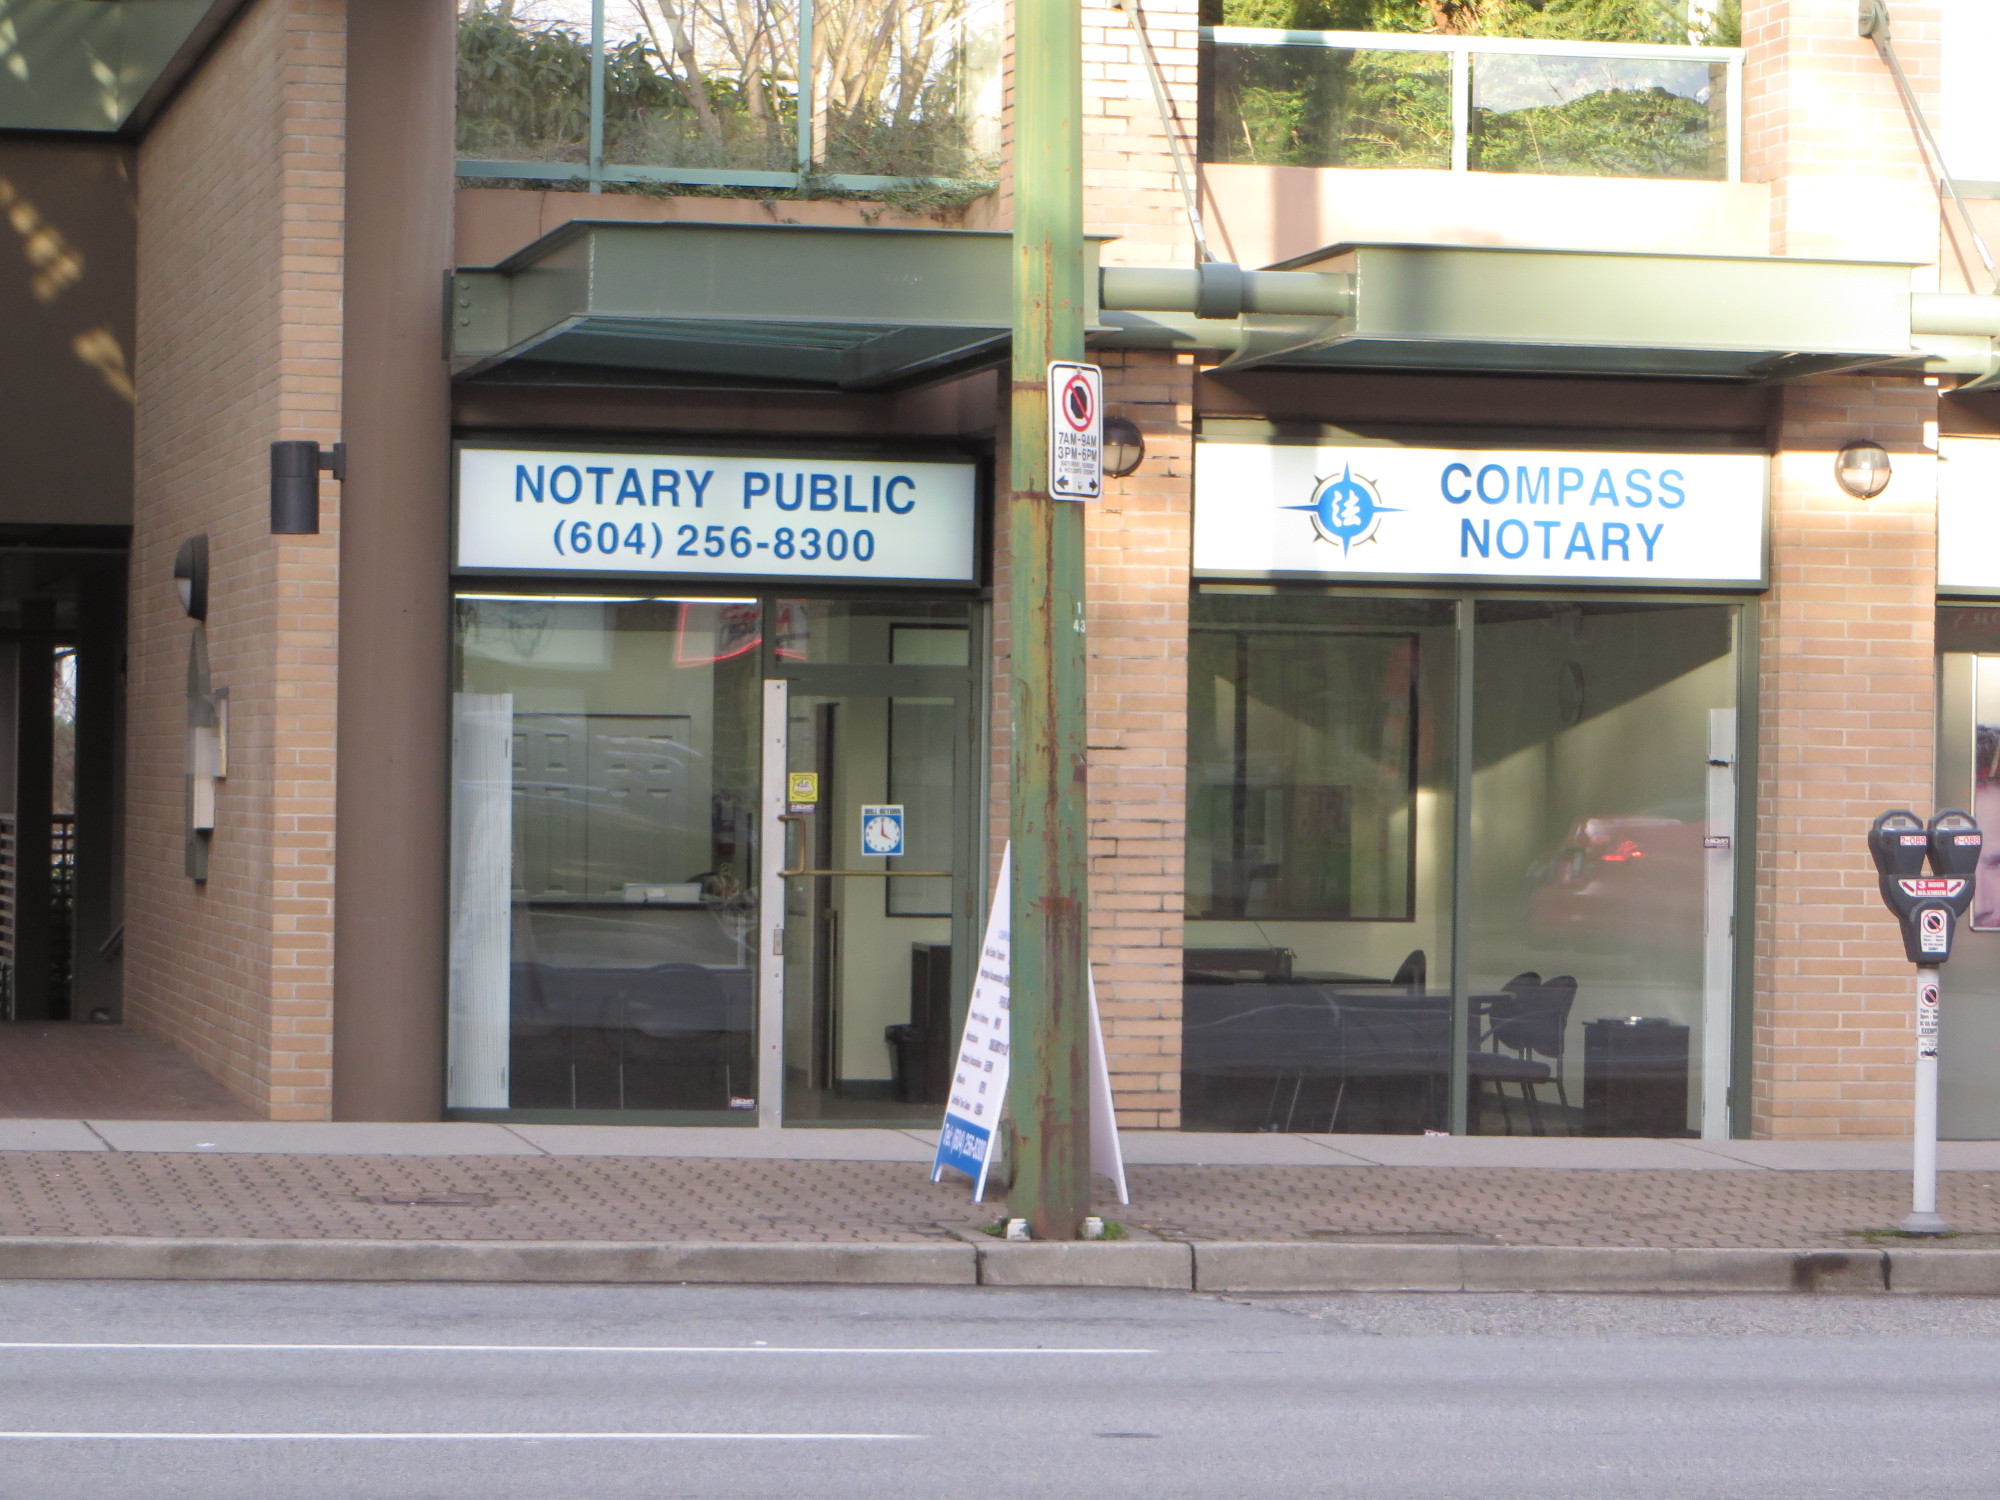 Compass Notary store front location